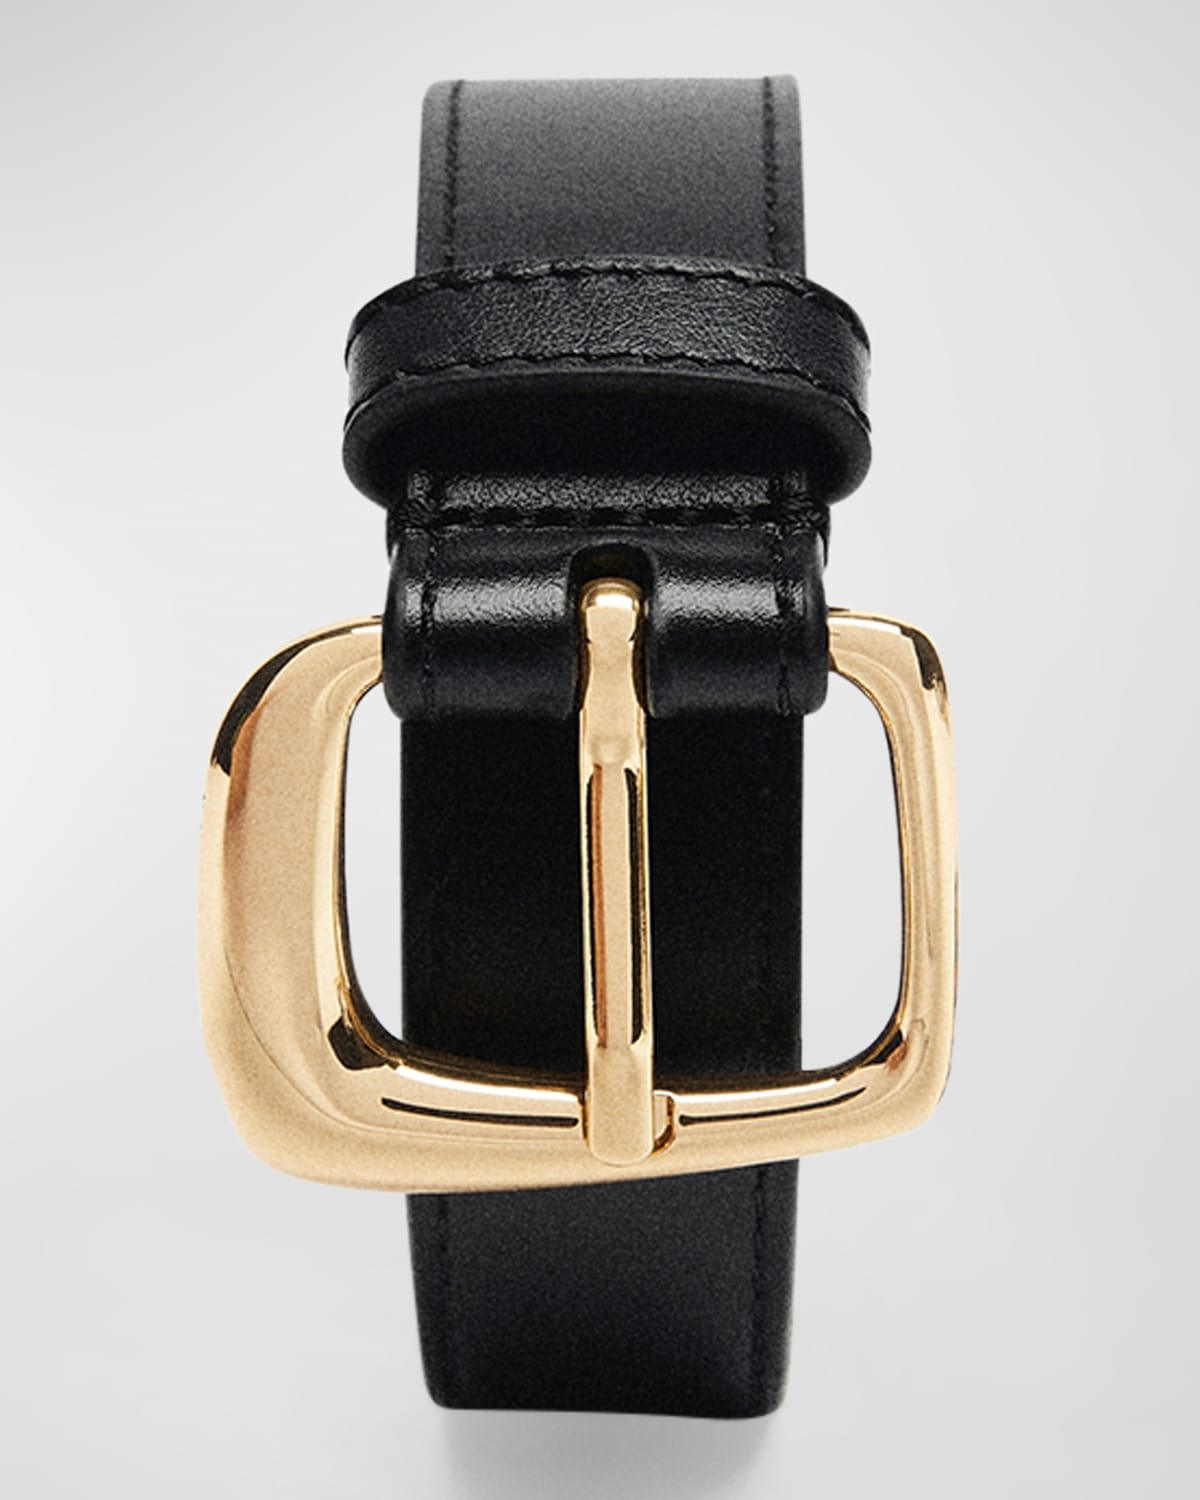 Oval Buckled Leather Belt - 3